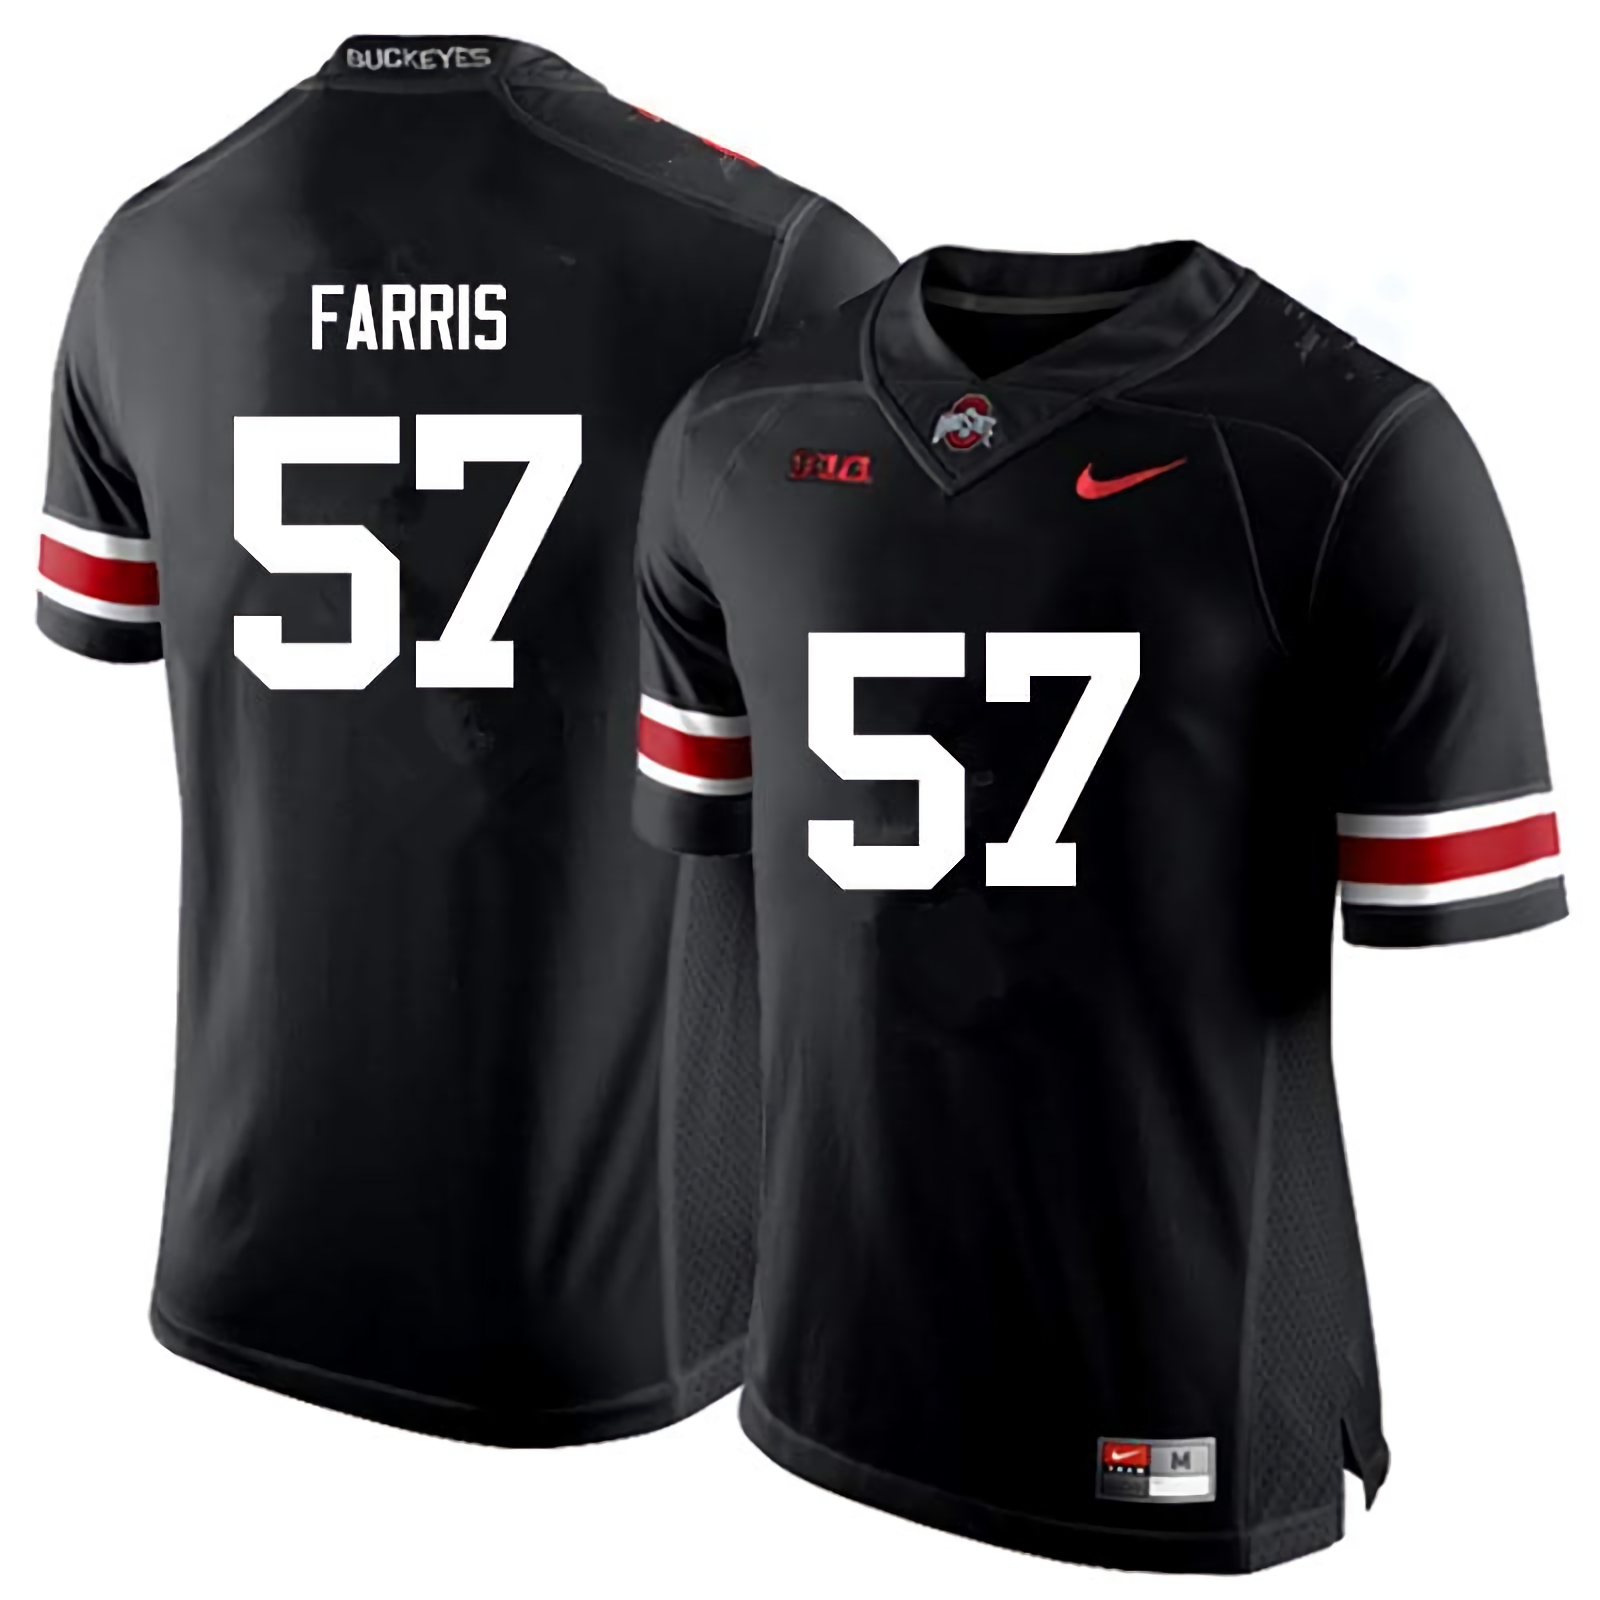 Chase Farris Ohio State Buckeyes Men's NCAA #57 Nike Black College Stitched Football Jersey SAO1656OG